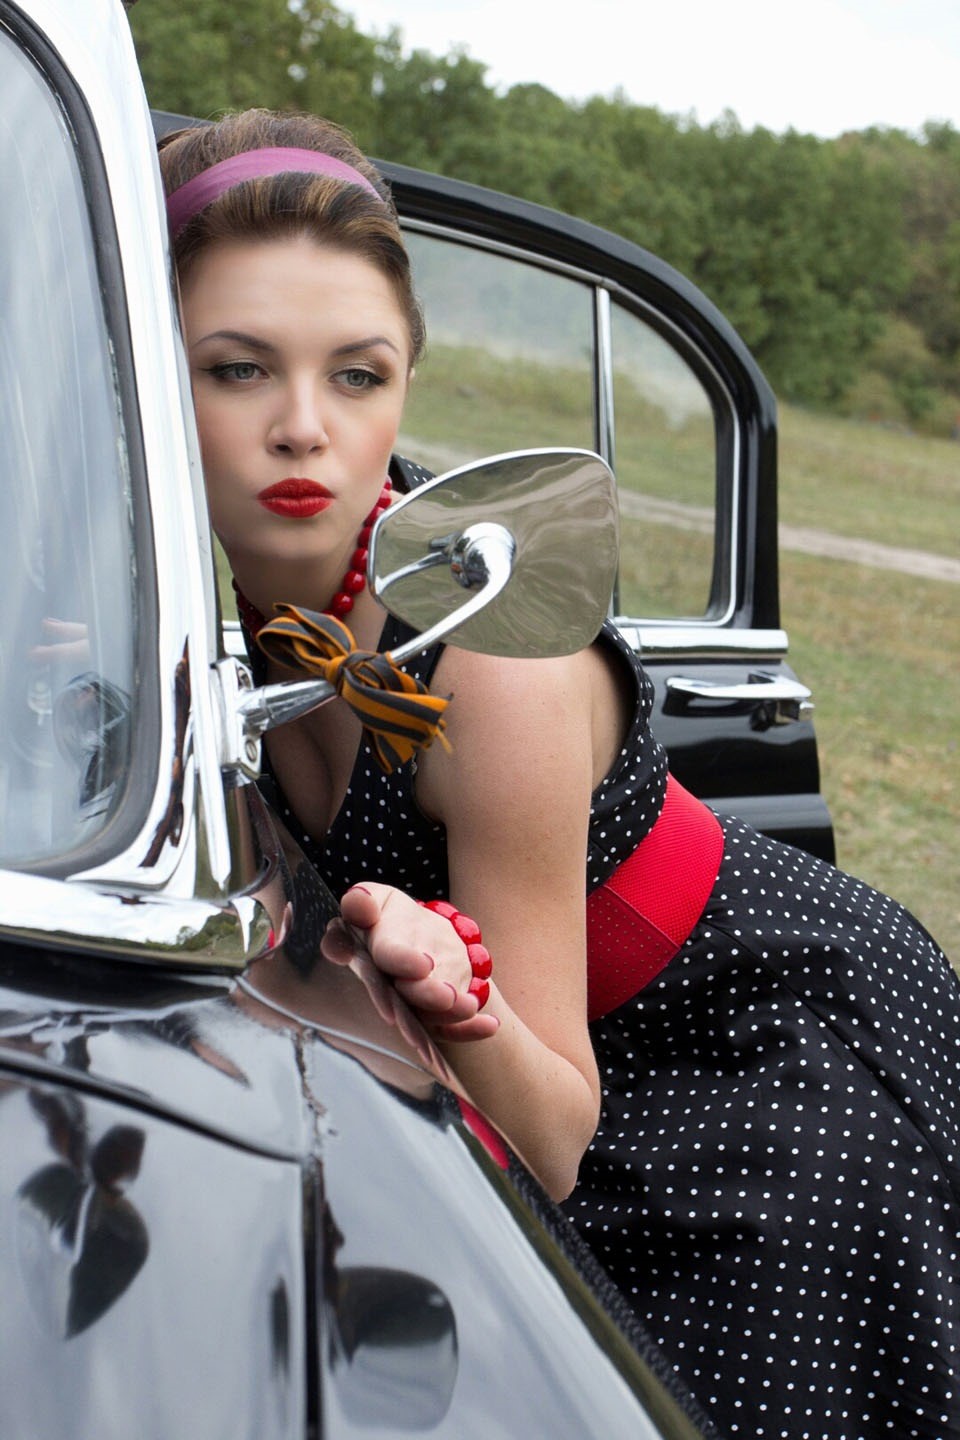 A model and a Russian car.